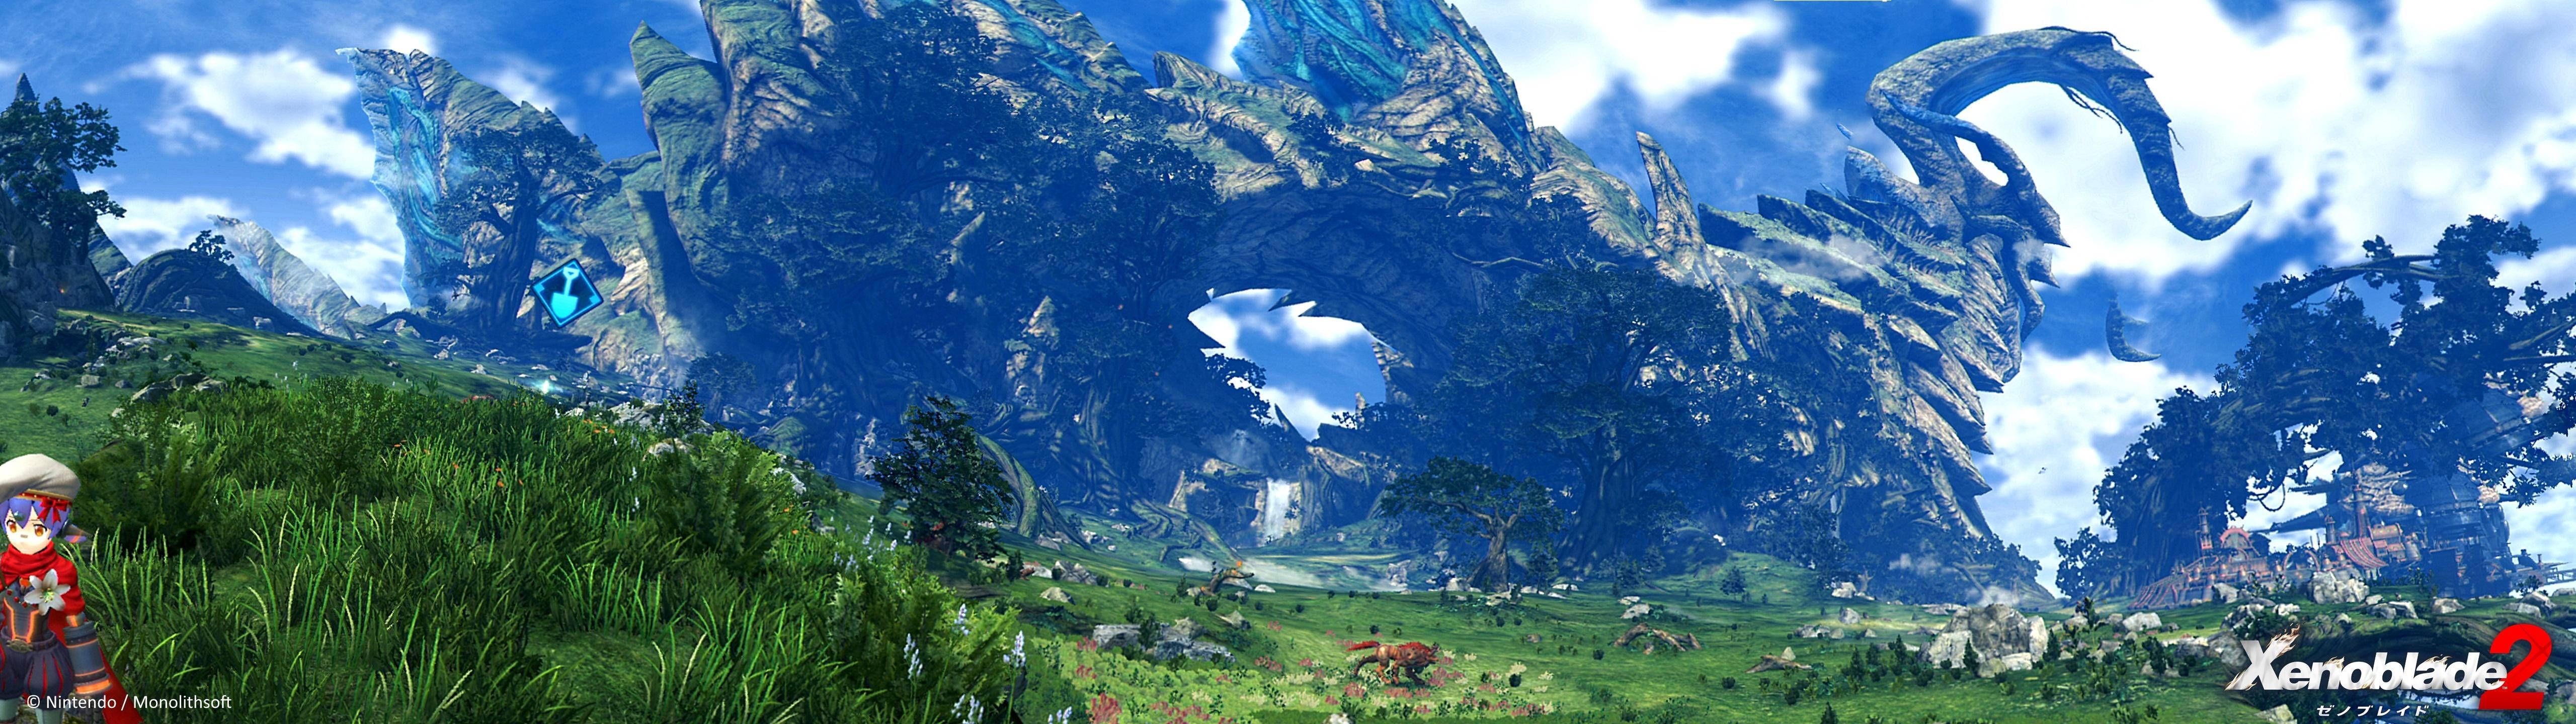 A screenshot of the game, with mountains and trees in it - 5120x1440